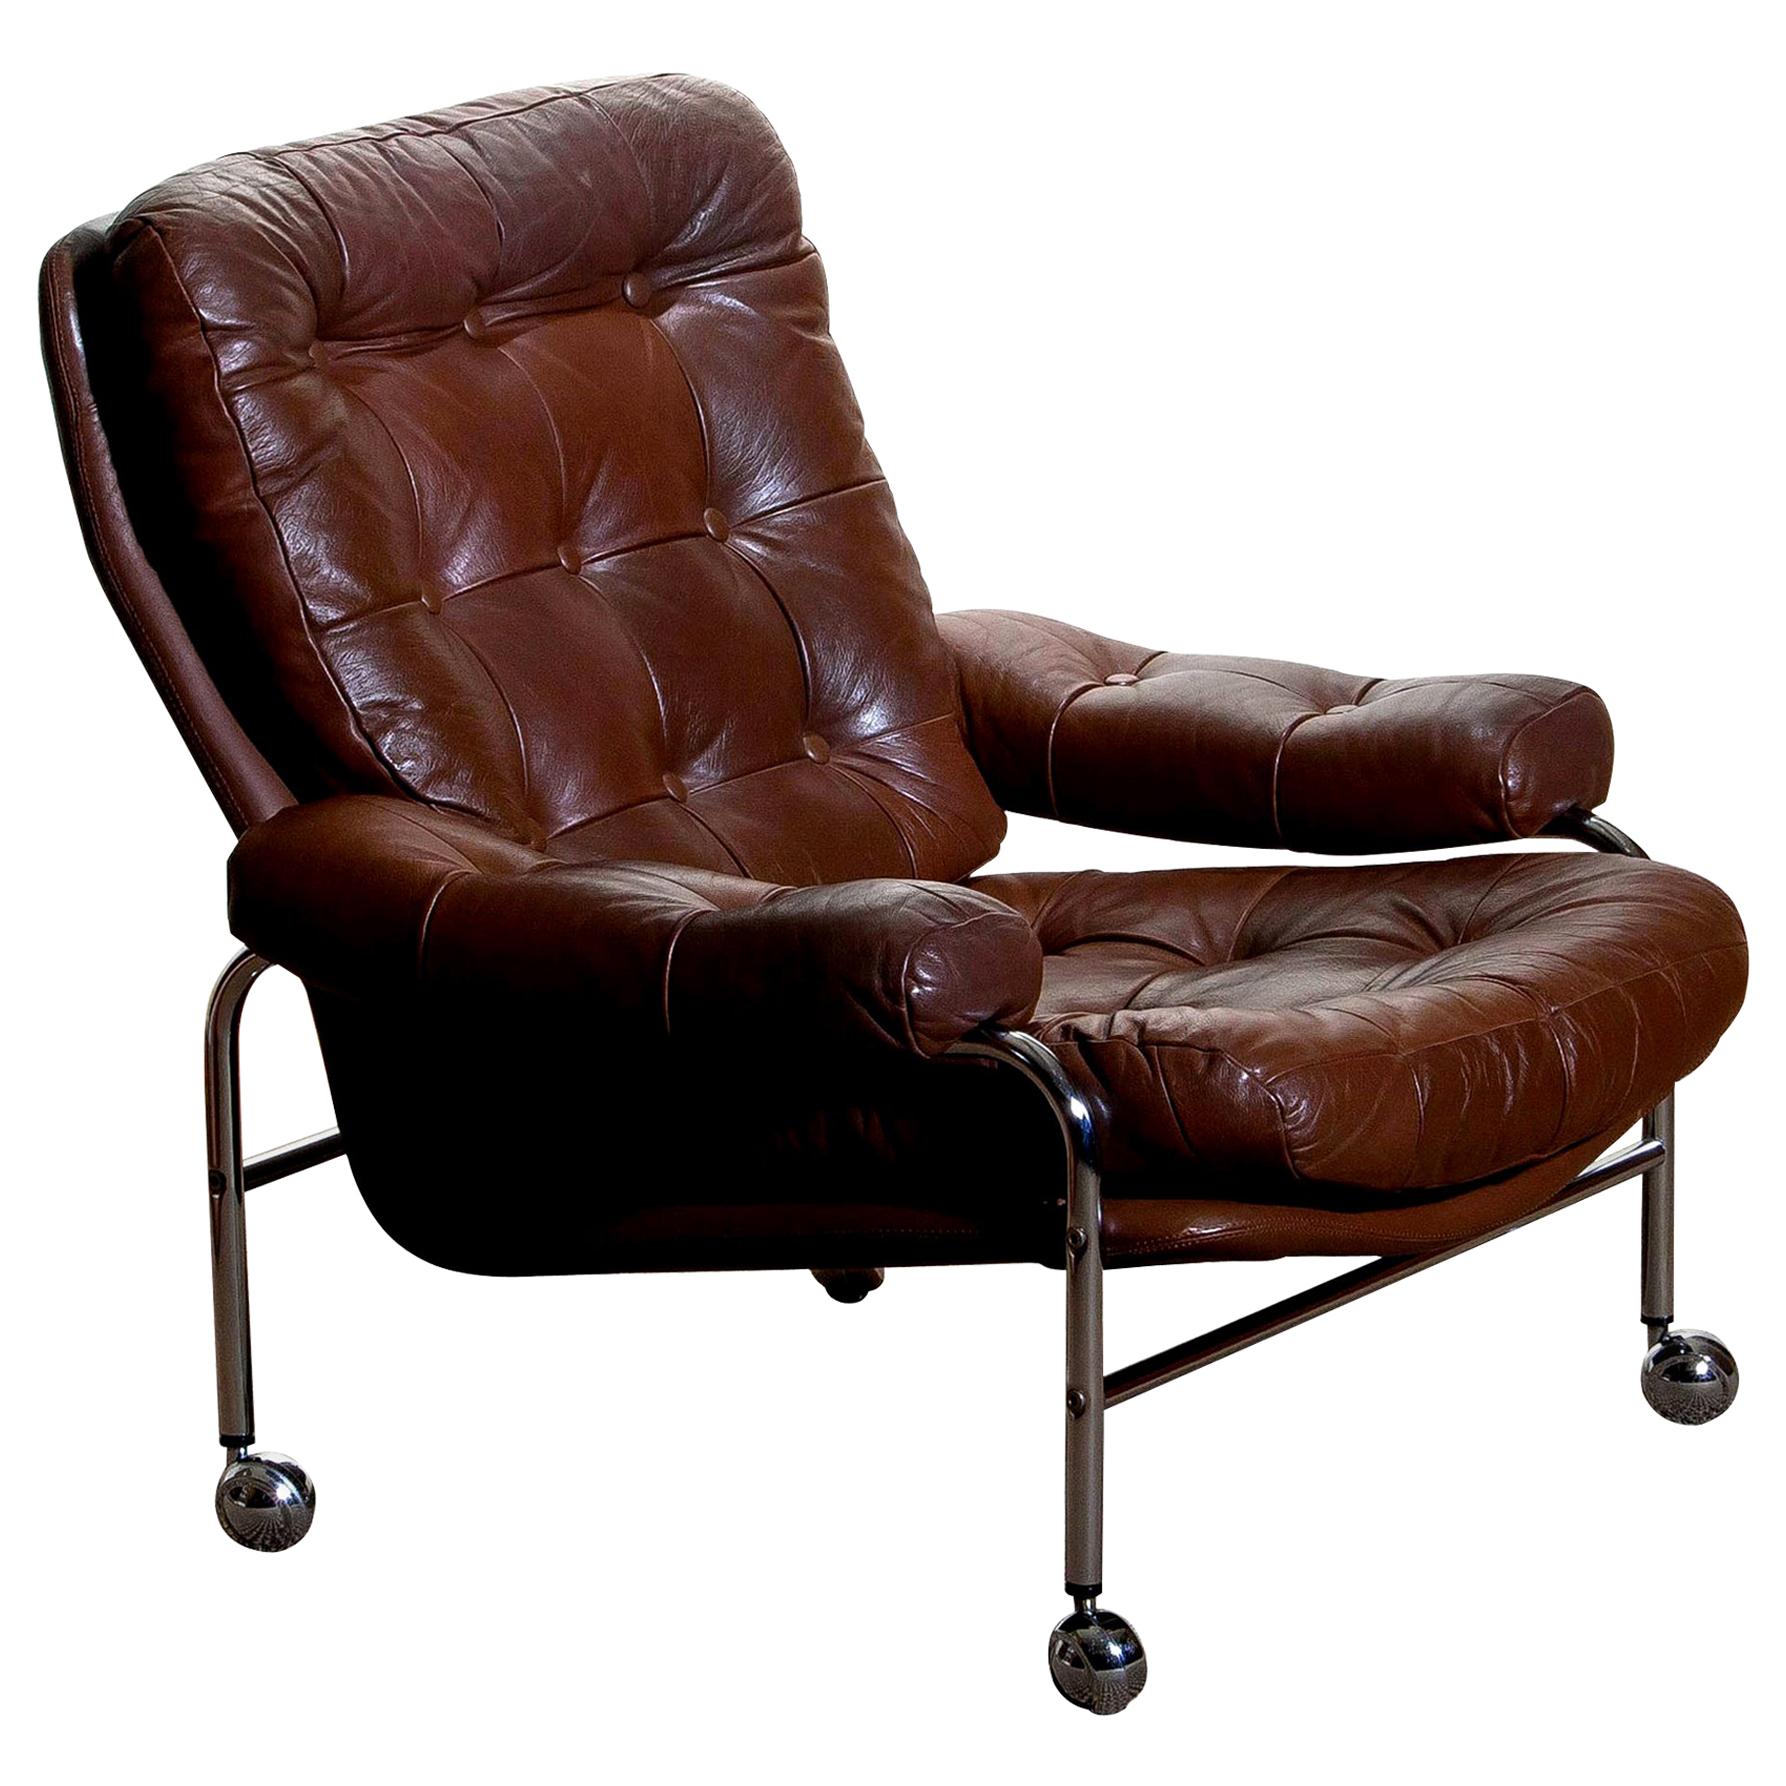 Mid-Century Modern 1 Chrome and Brown Leather Easy or Lounge Chair by Scapa Rydaholm, Sweden, 1970s